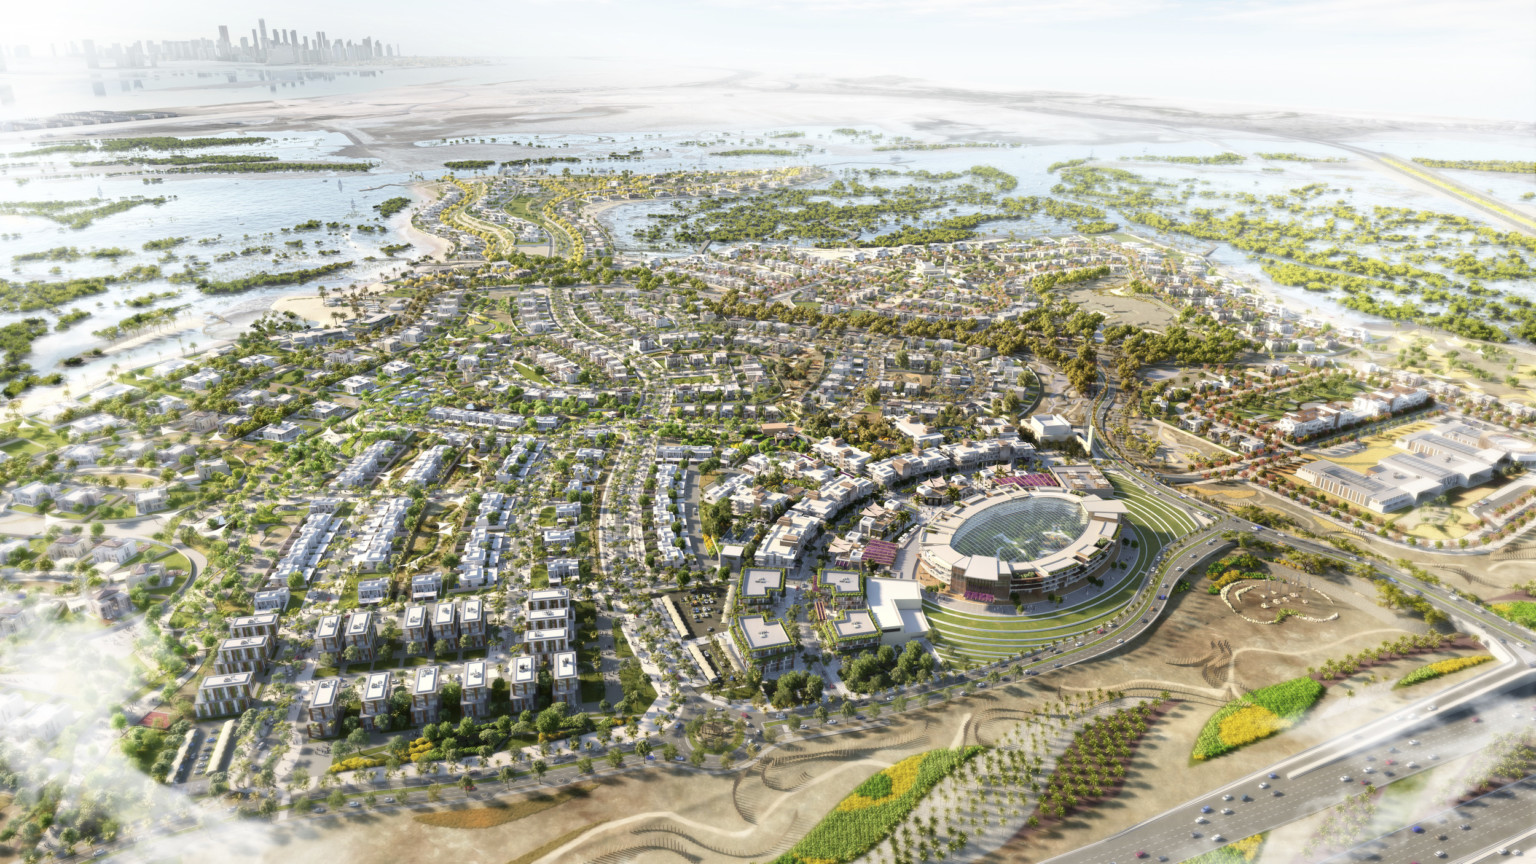 Jubail Island aerial view rendering with buildings surrounded by greenery, water adjacent